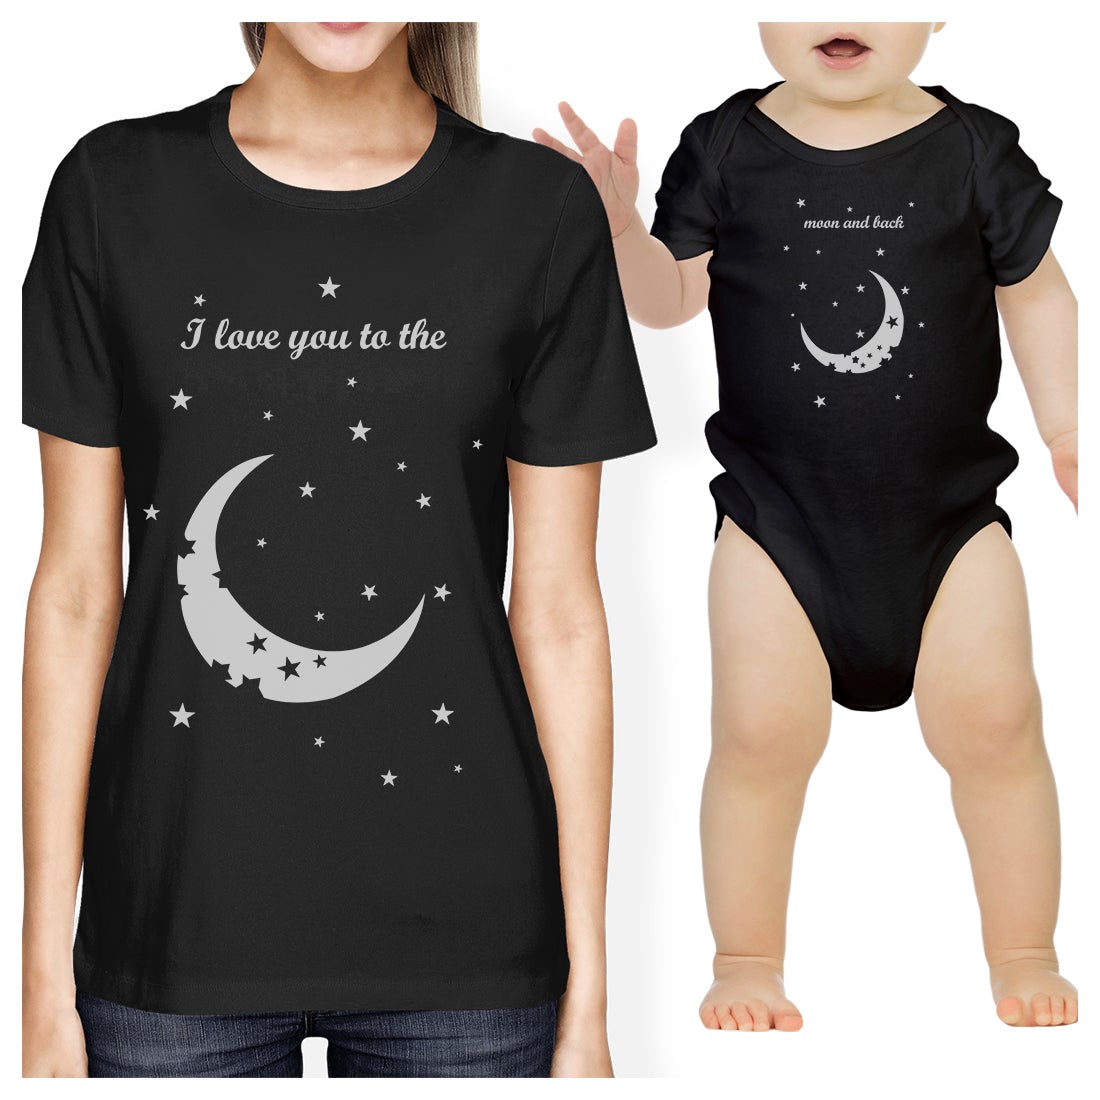 Moon And Back Mom and Baby Matching Gift T-Shirts For New Moms Black